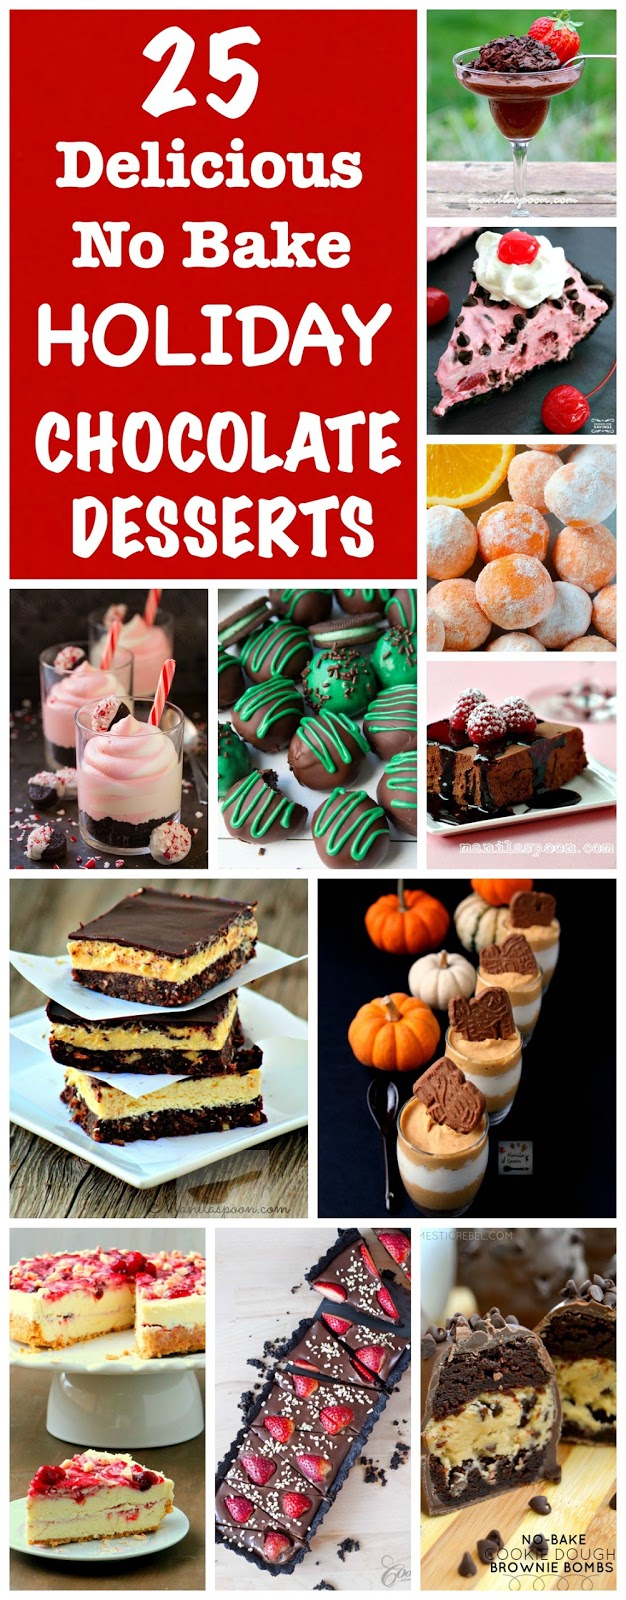 25 Delicious No Bake Holiday Chocolate Desserts